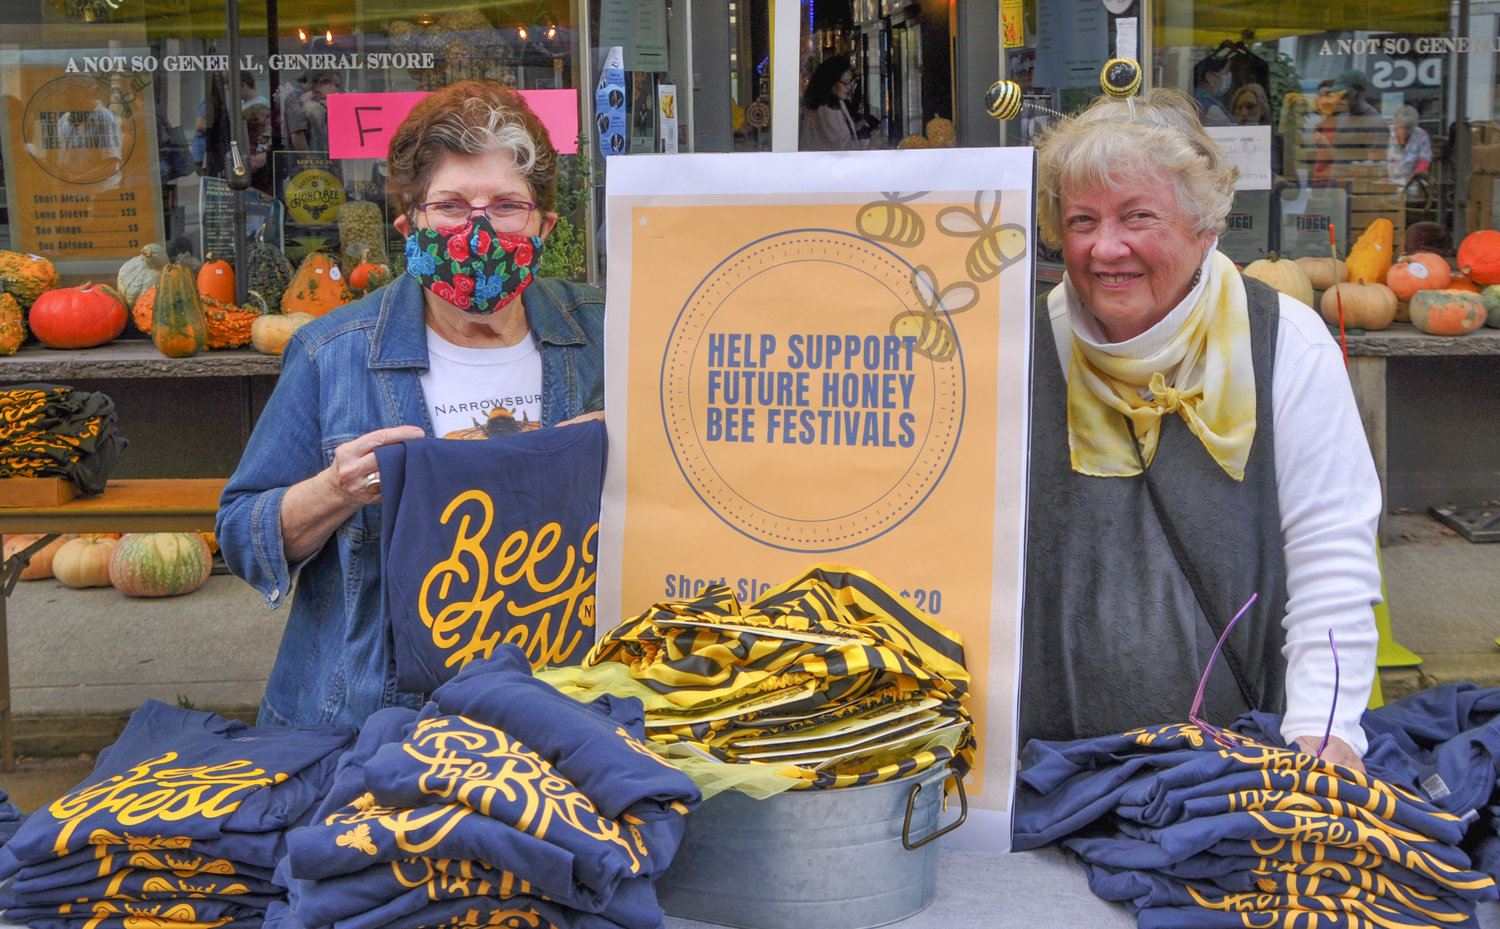 Iris Helfeld, left, and Jane Luchsinger welcome visitors to Honeybee festival on Saturday. The 4 to 8 p.m. celebration highlights the importance of health bee populations.